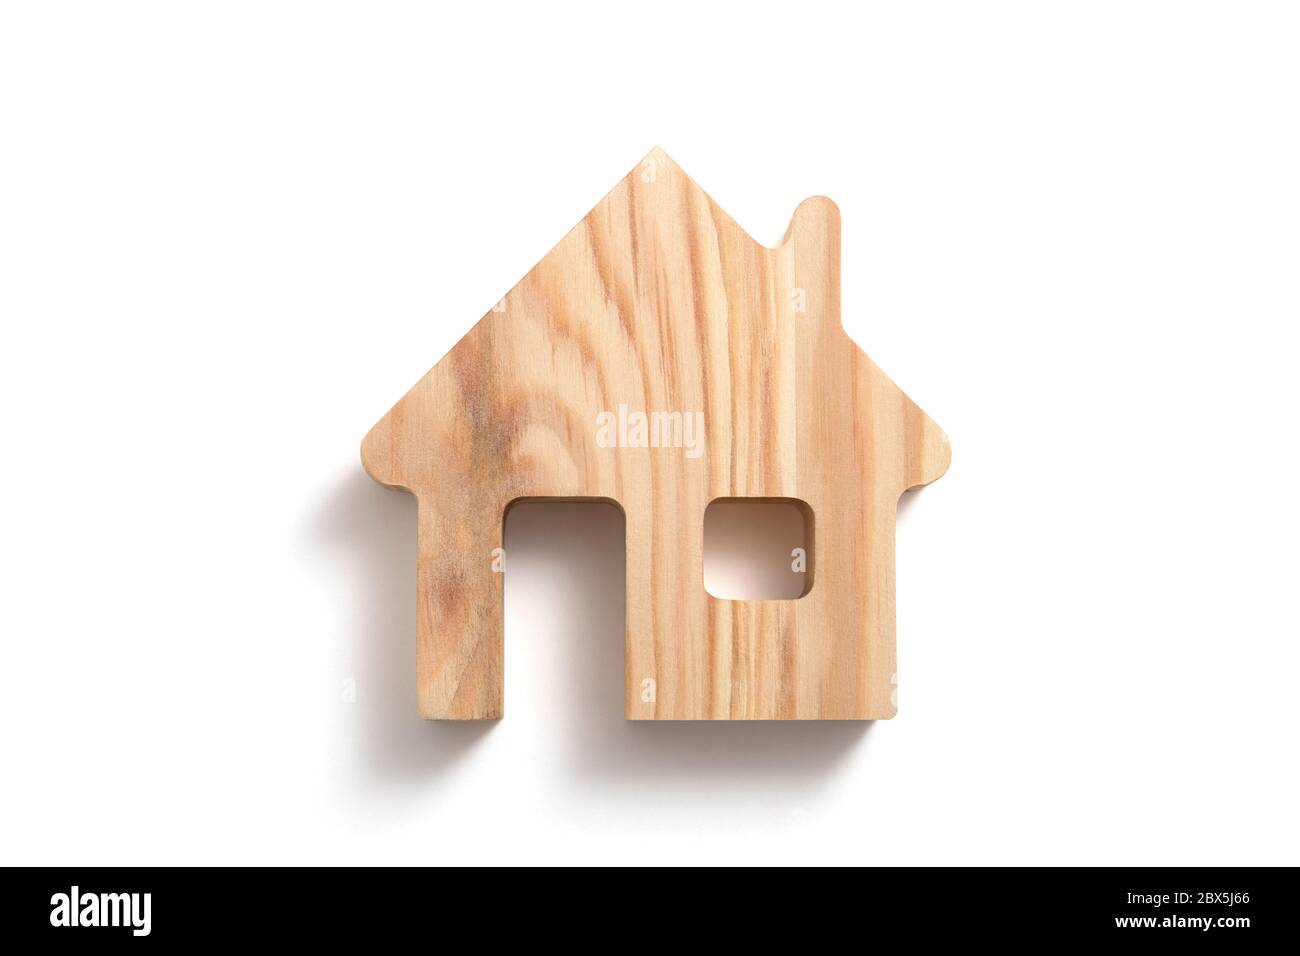 Wooden house shape on white background with clipping path Stock Photo